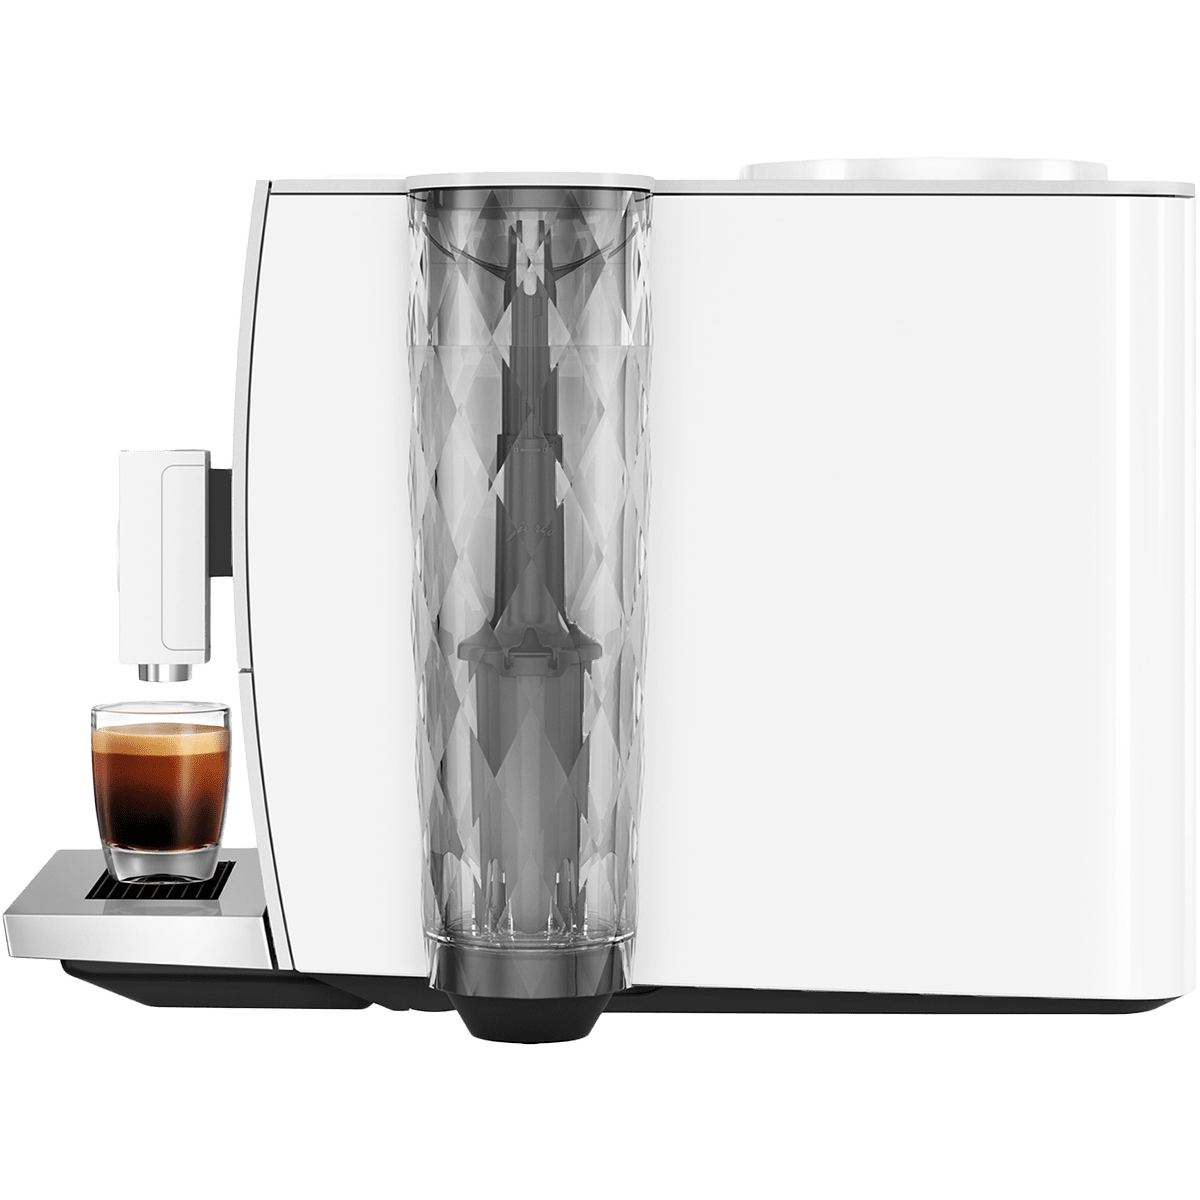 https://s3-assets.quenchessentials.com/media/images/products/jura-ena-4-automatic-espresso-machine-side-2.png